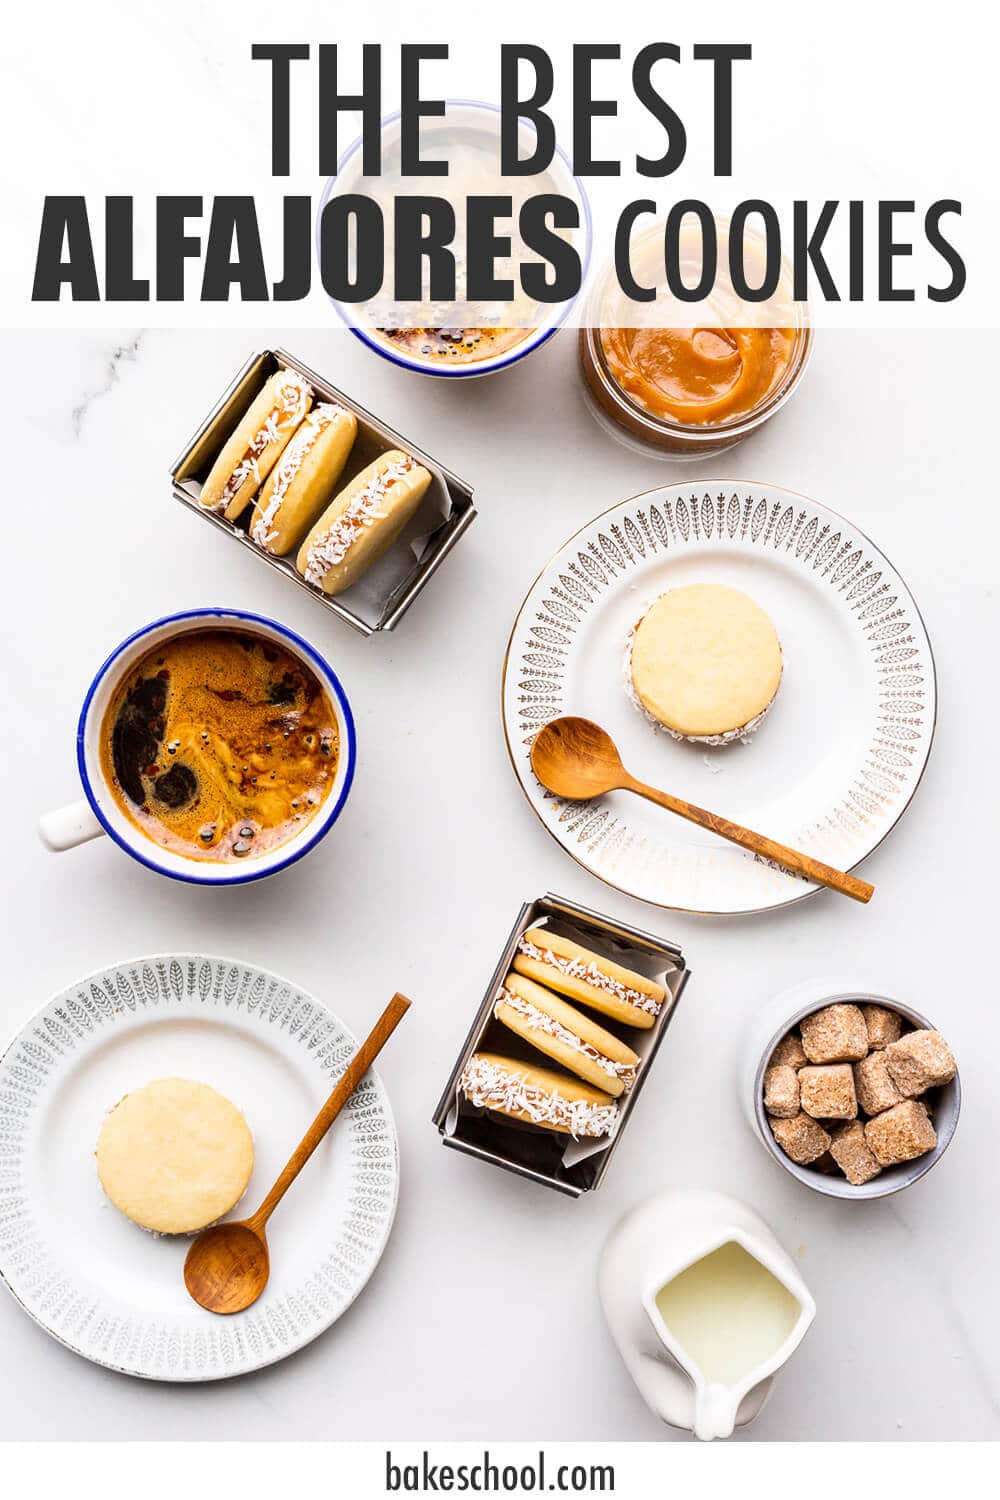 Alfajores sandwich cookies coated in coconut and served with coffee.